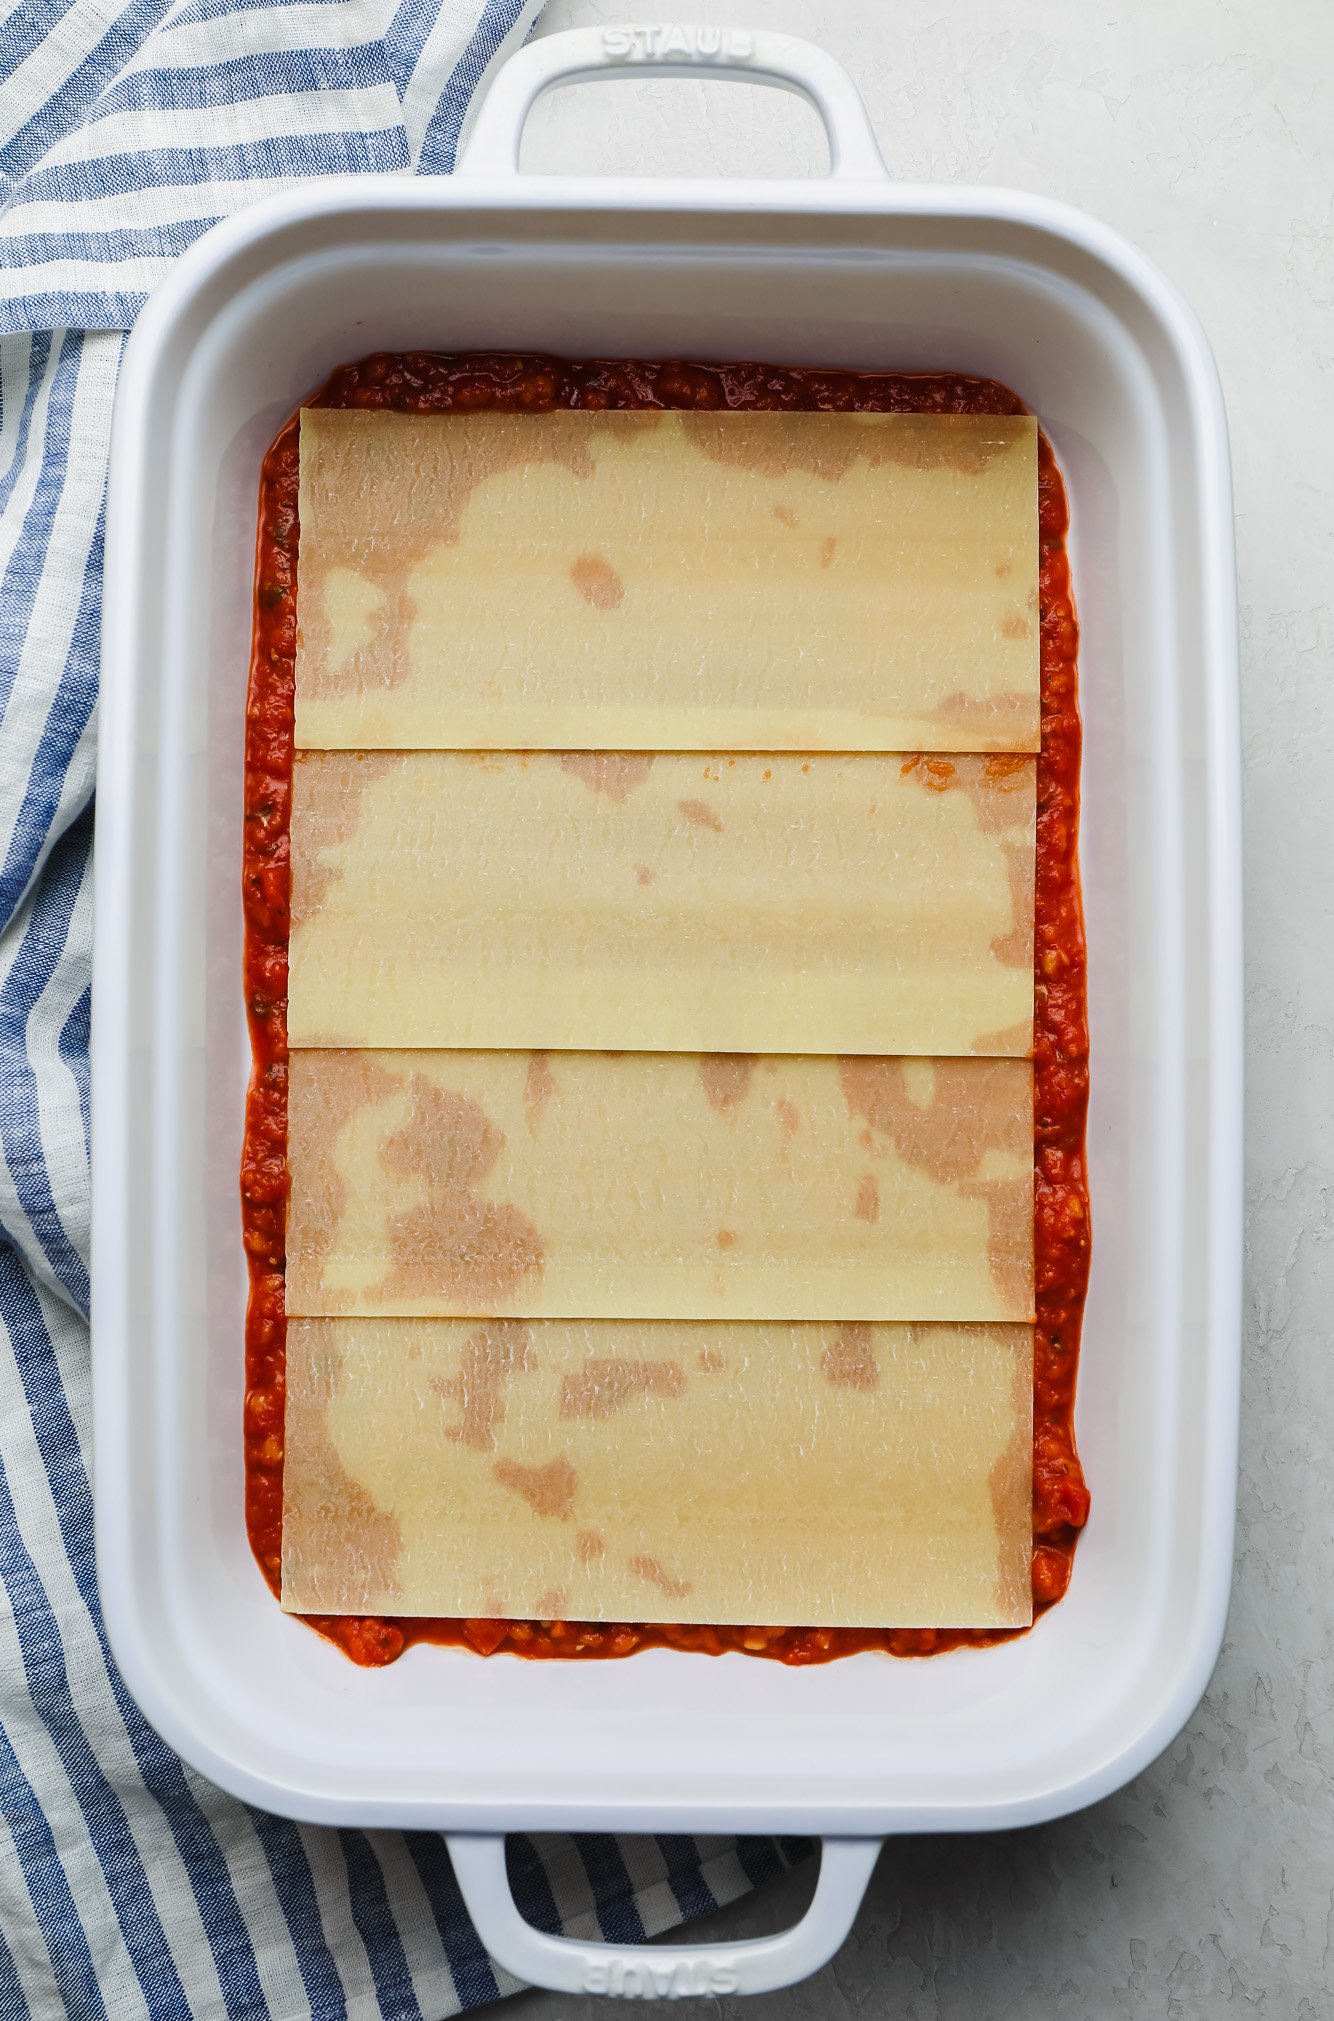 layering lasagna noodles on top of red sauce in a white casserole dish.